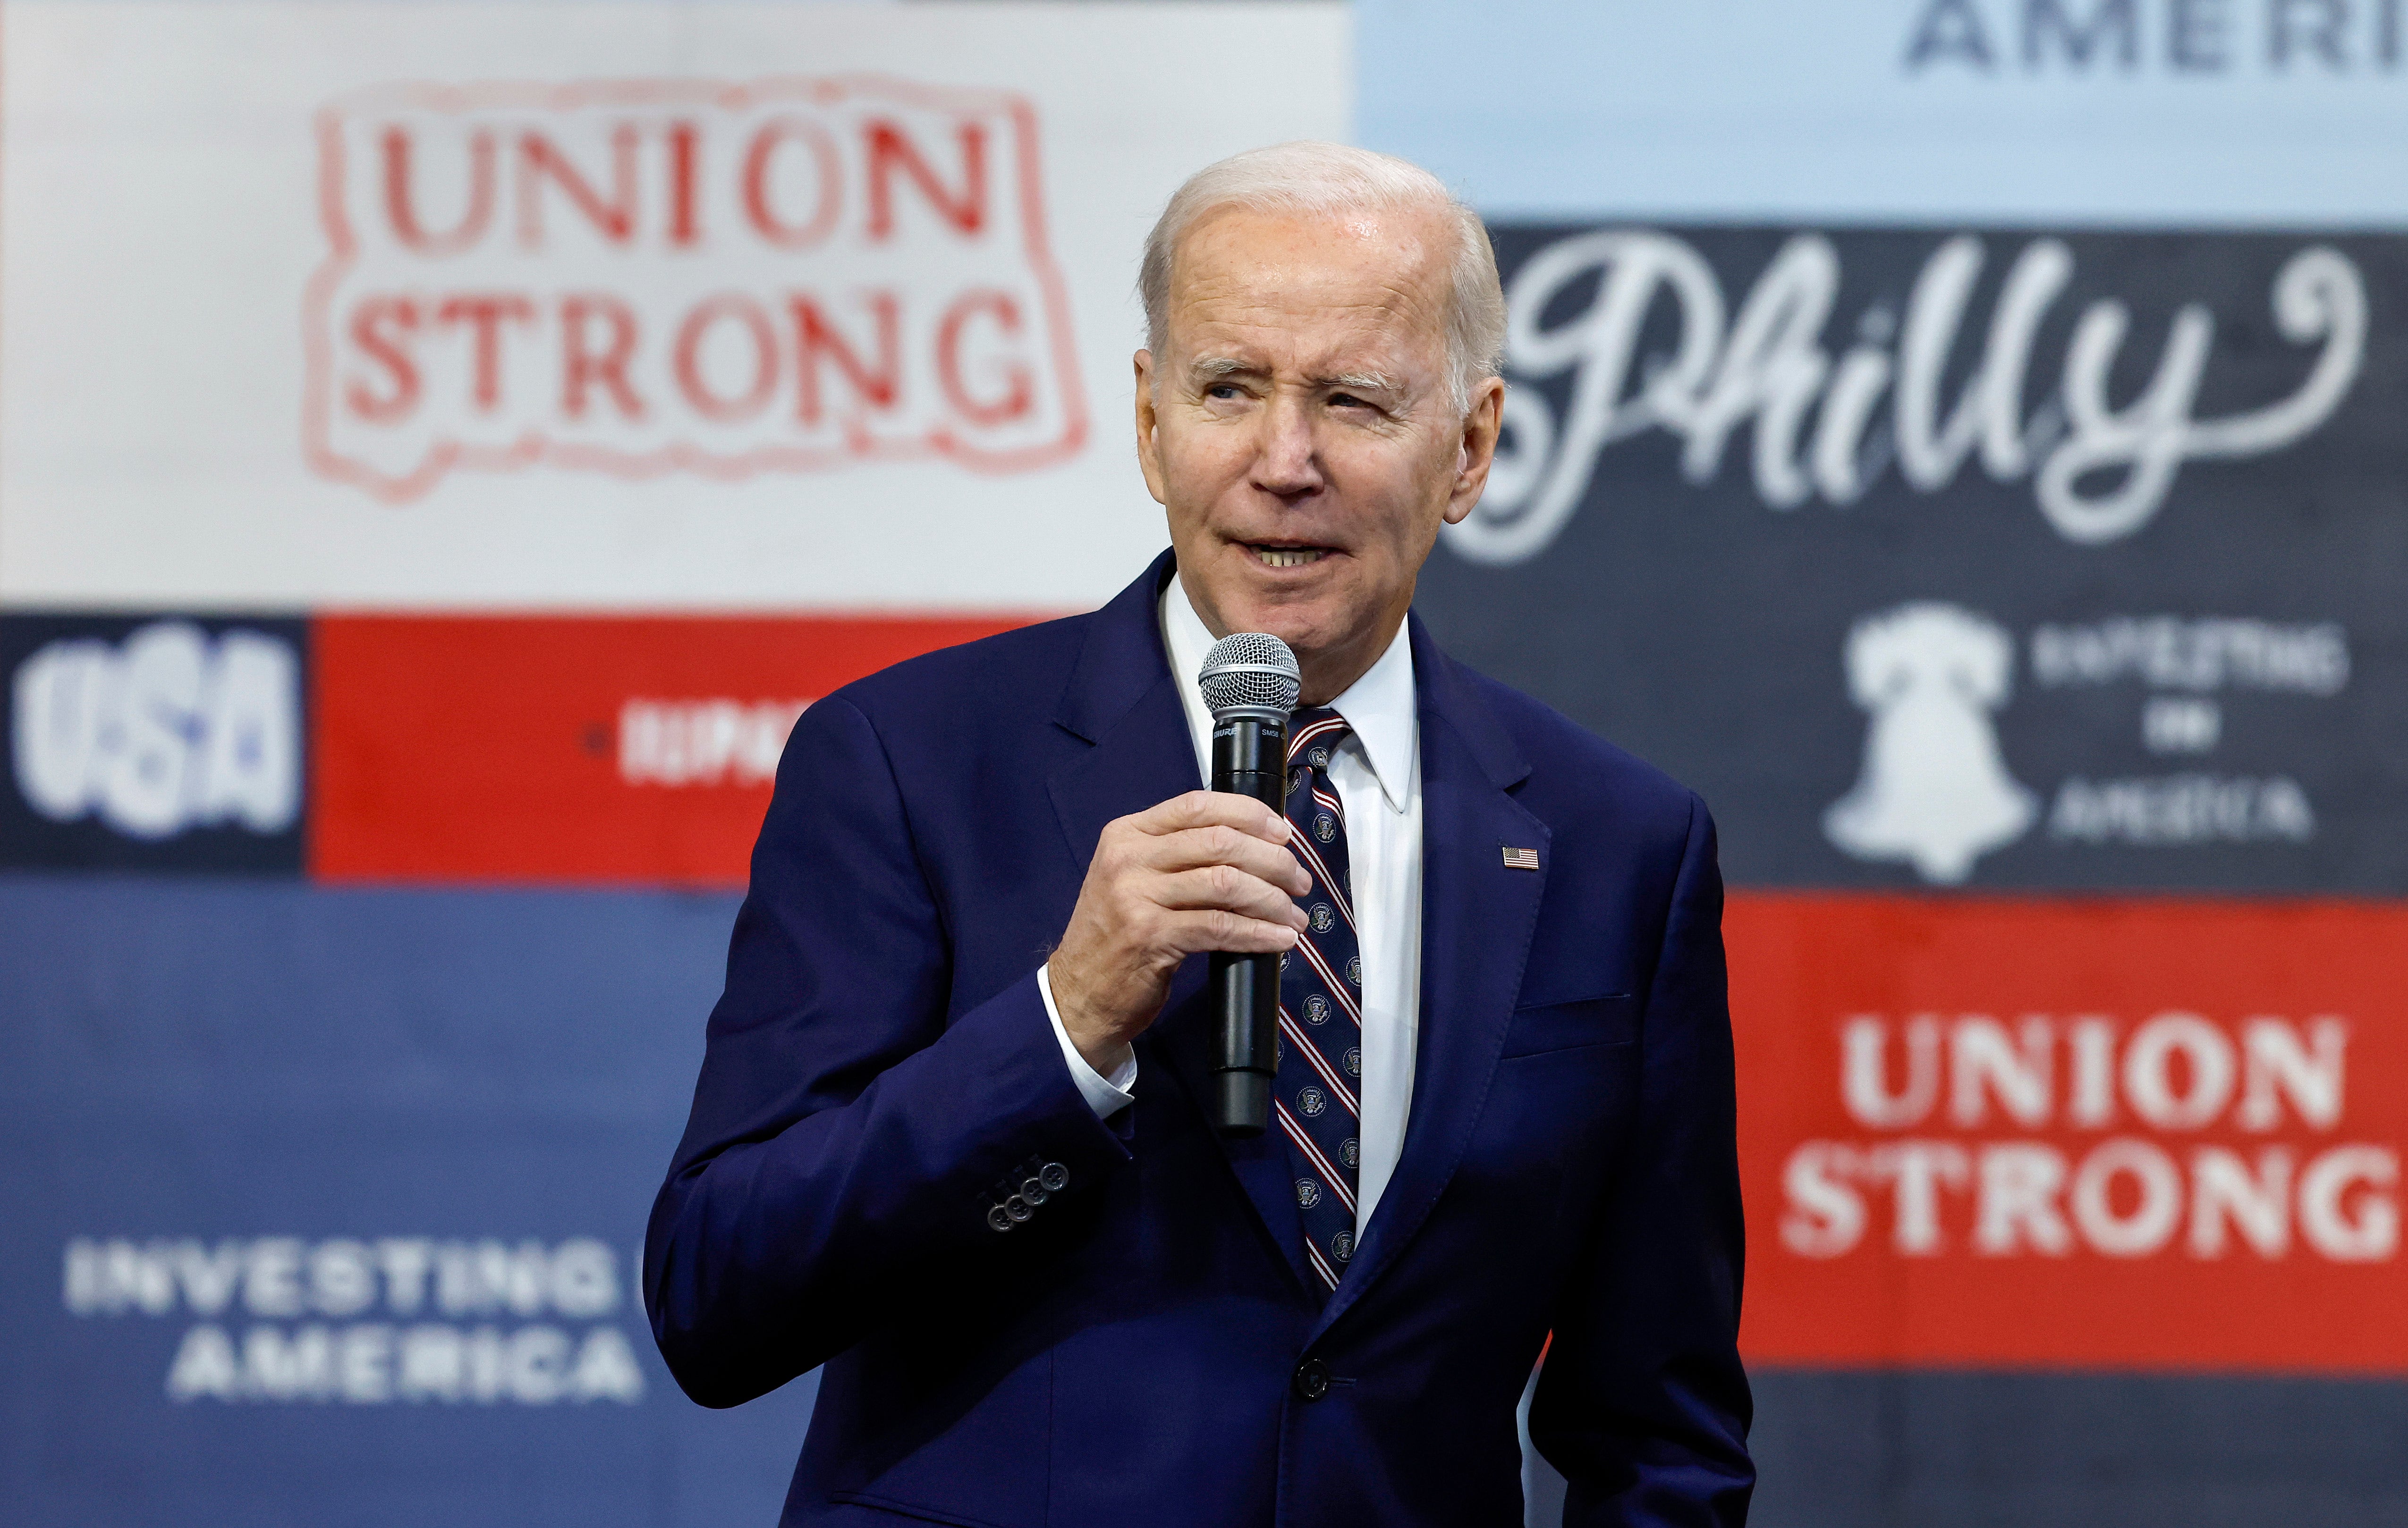 When it gets serious: Biden, Congress poised to square off over spending and debt